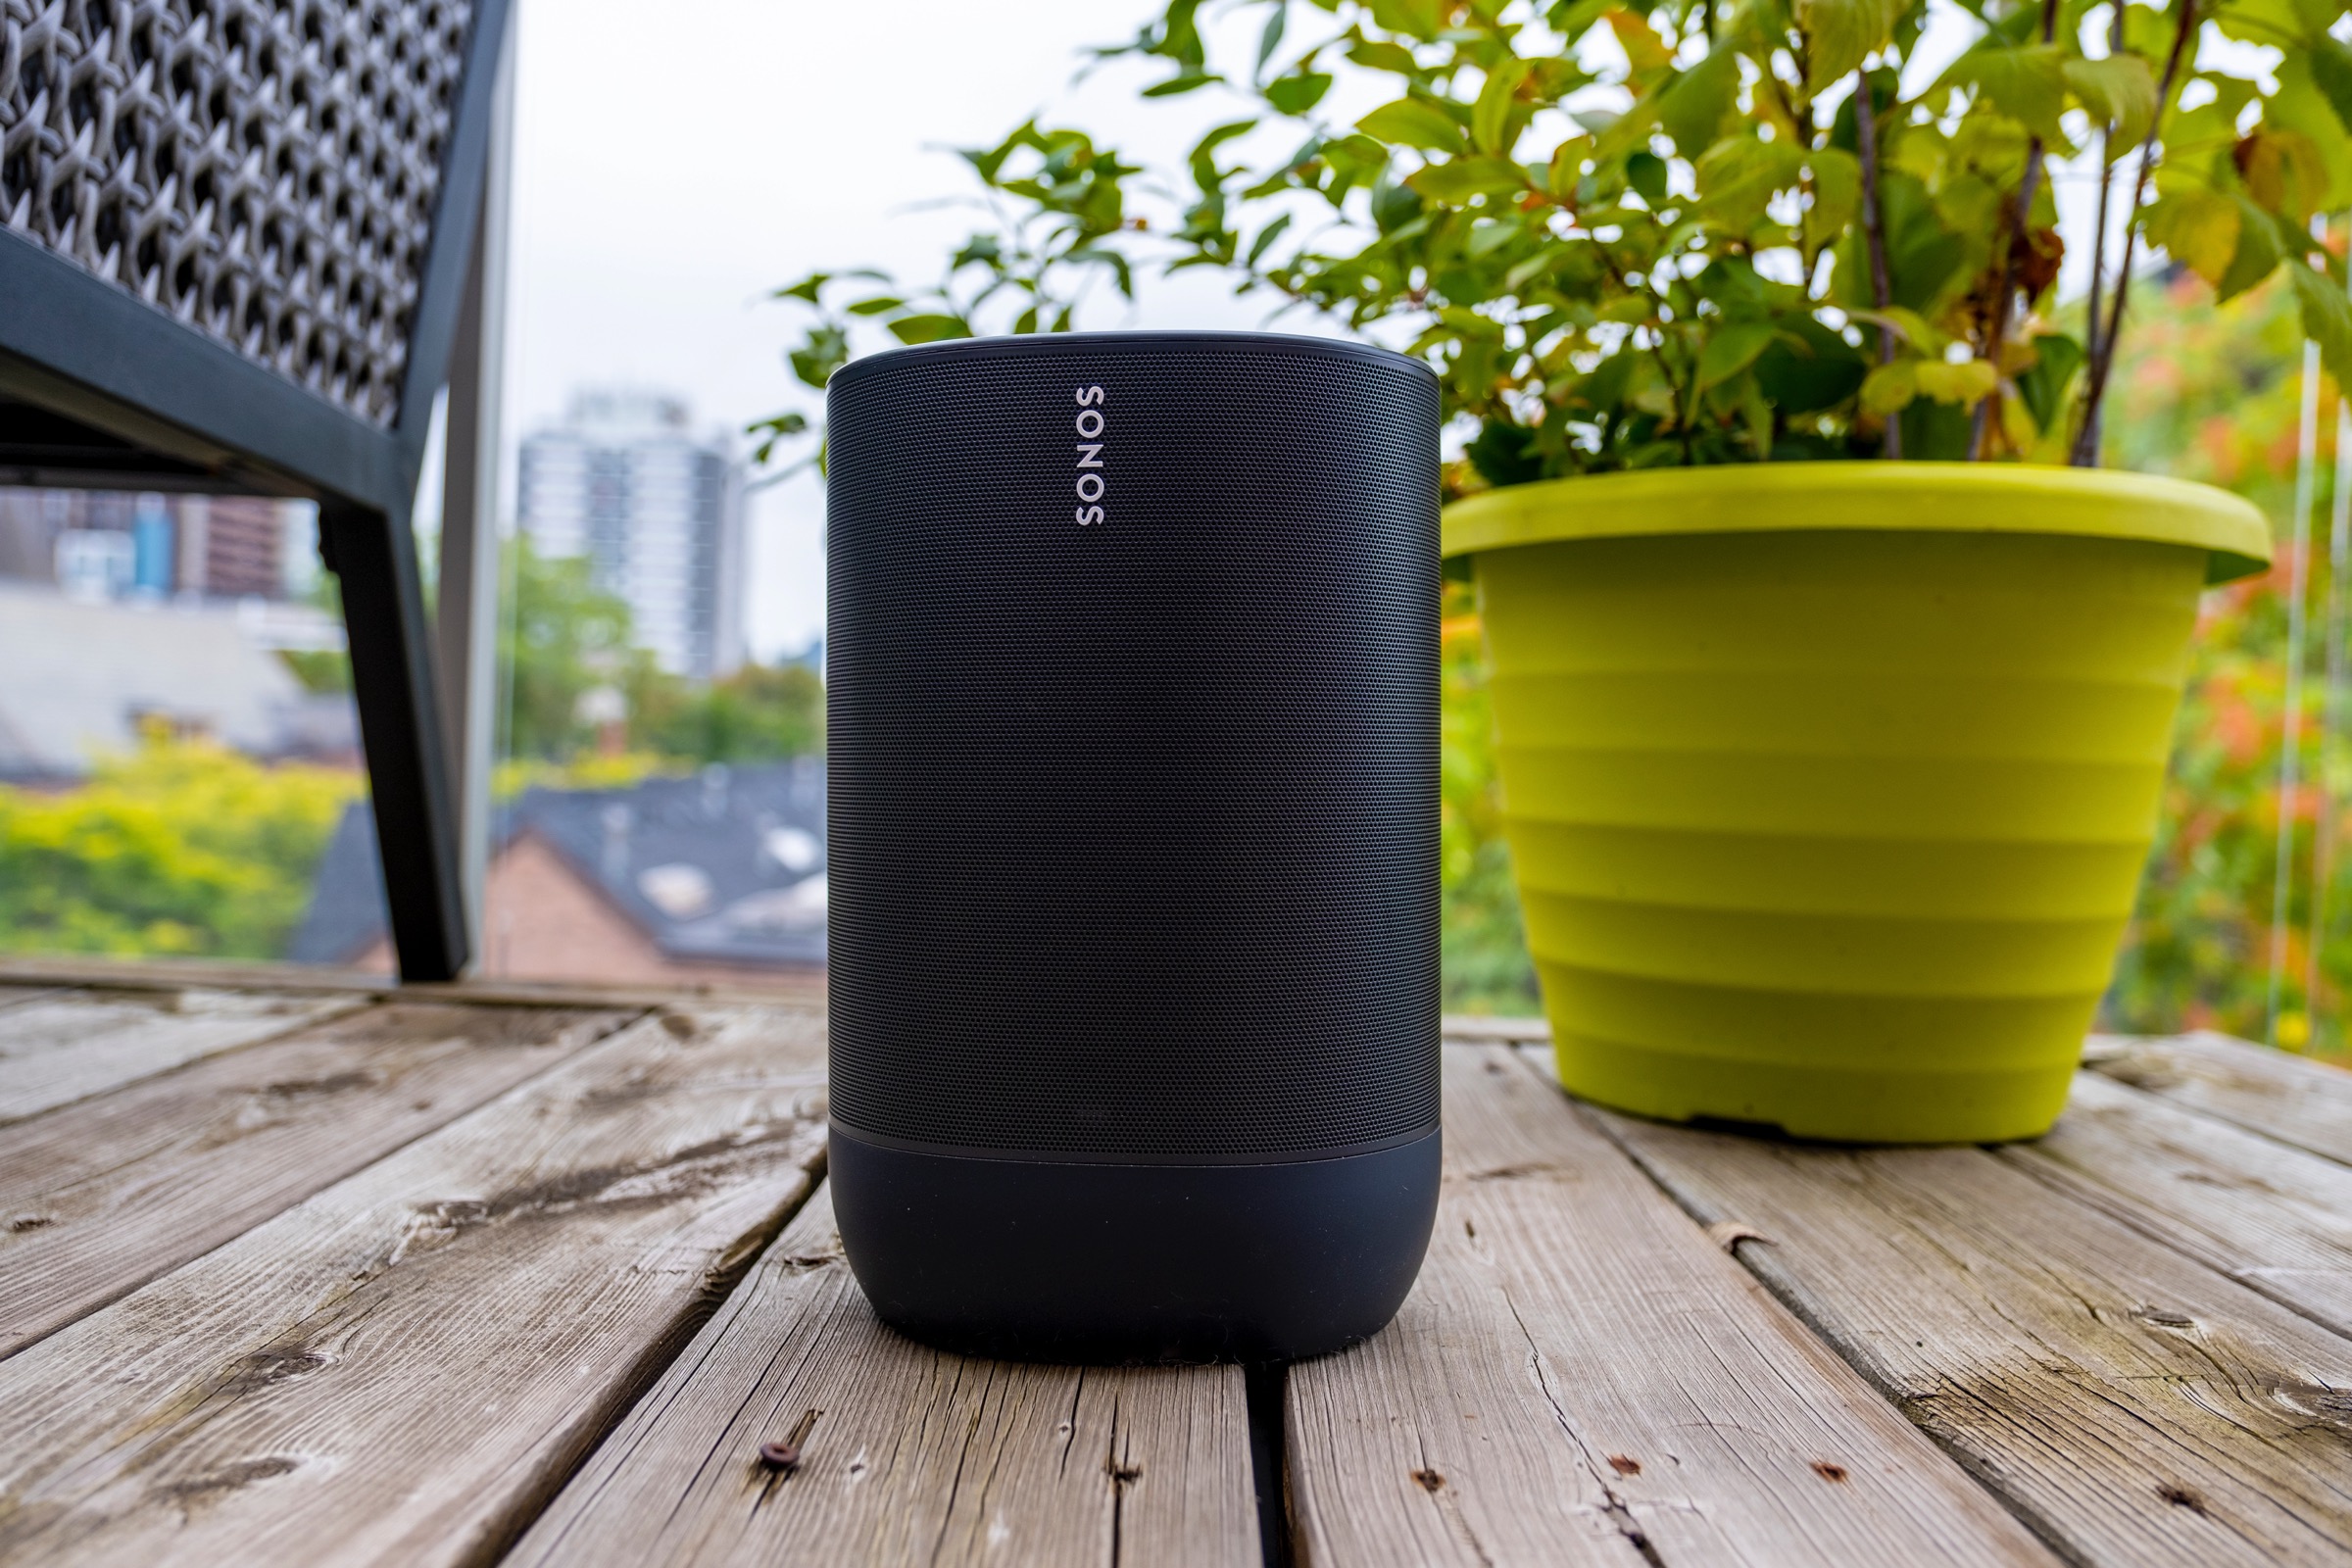 How to Use Sonos Speakers 